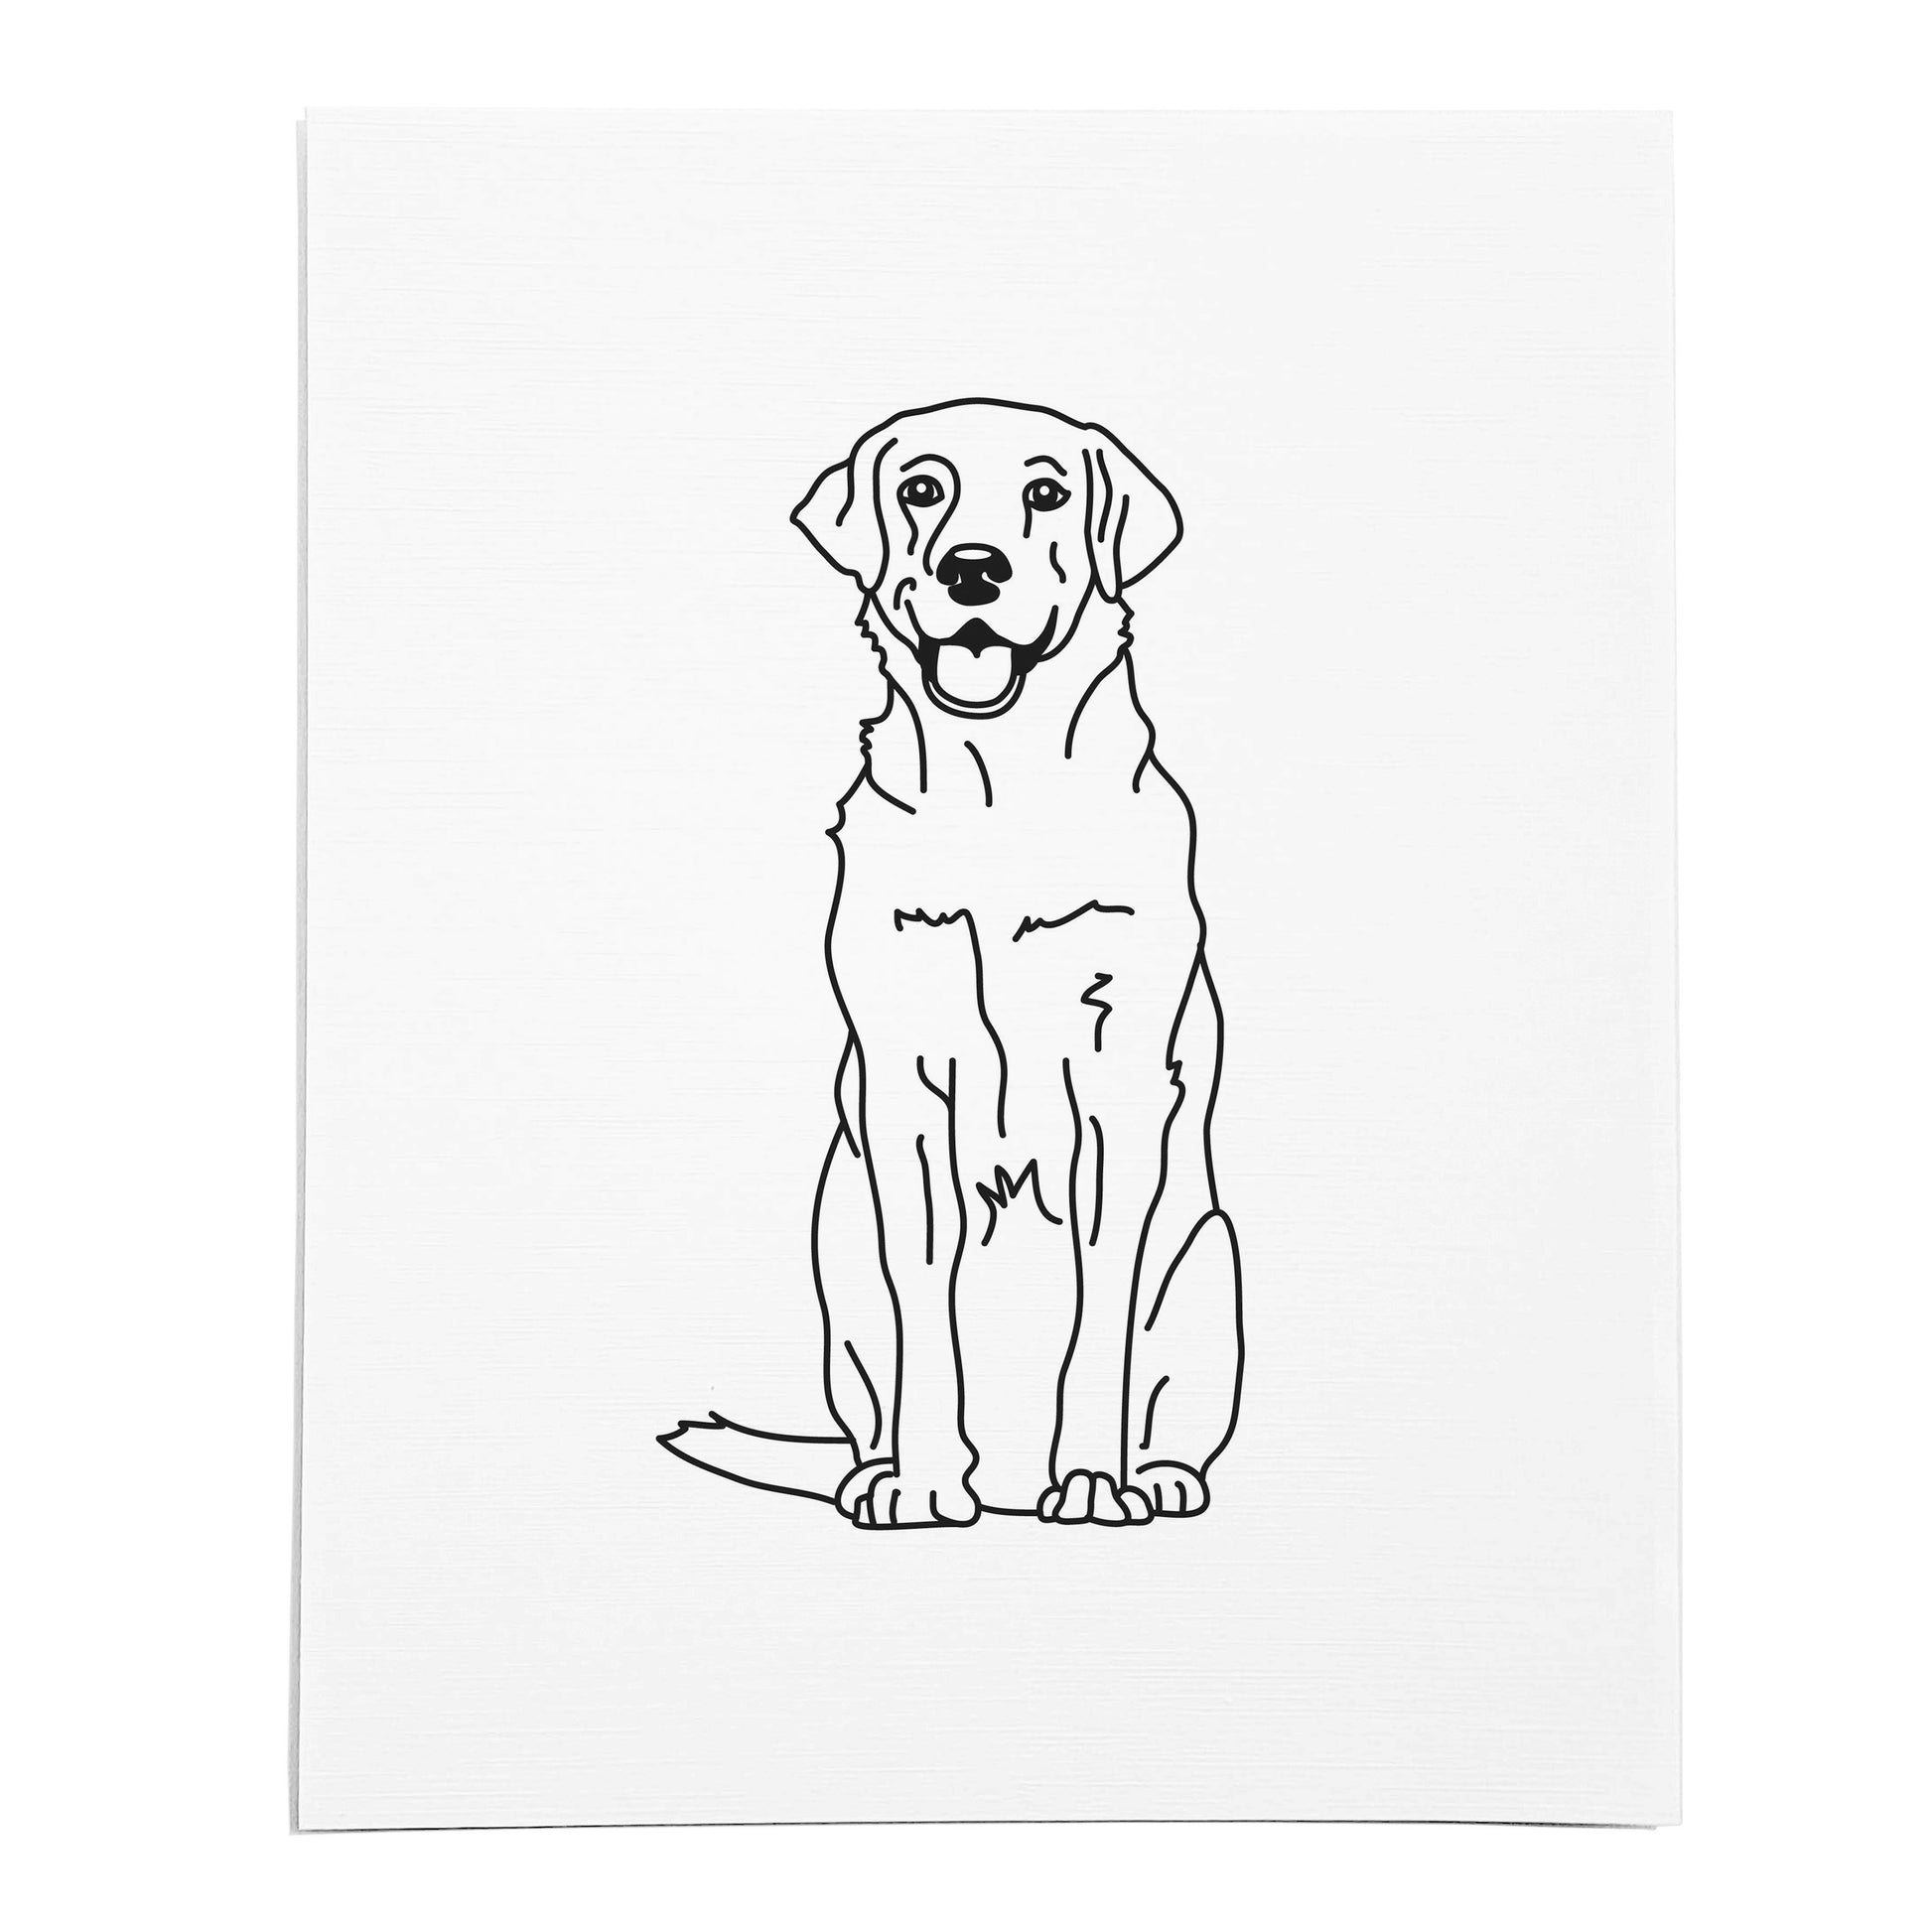 An art print featuring a line drawing of a Labrador dog on white linen paper